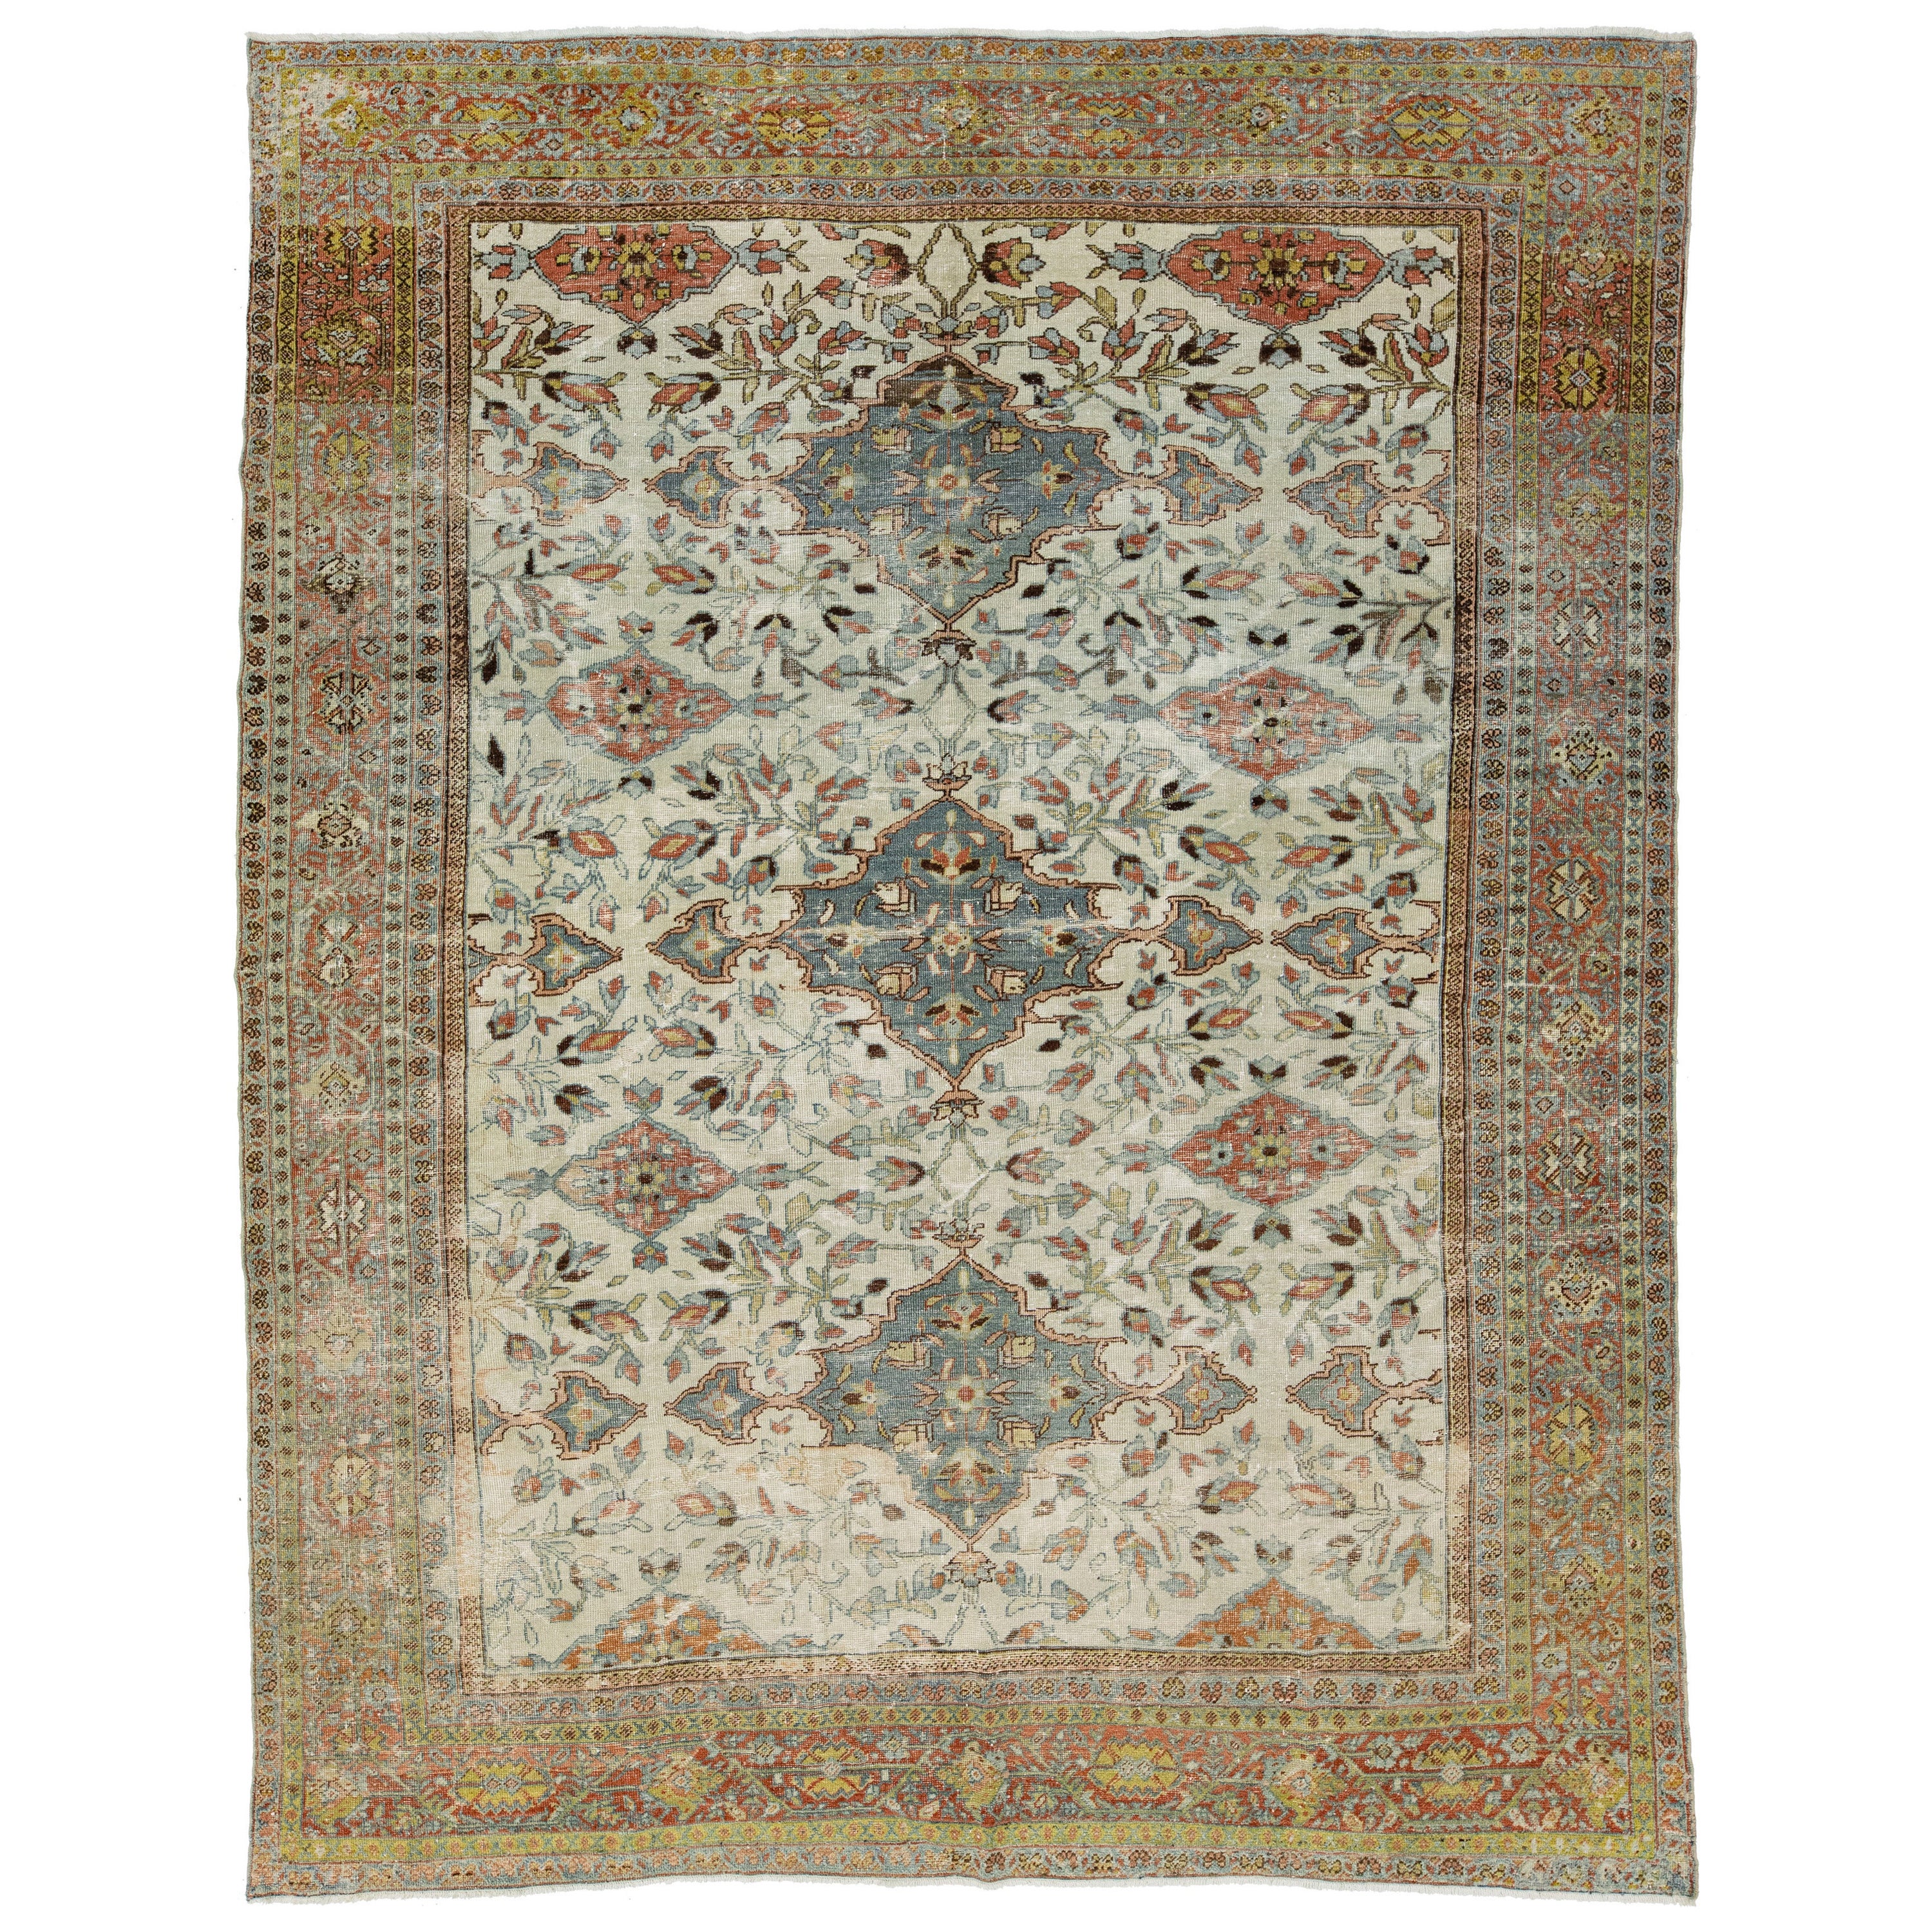 19th Century Persian Mahal Wool Rug In Beige Featuring an Allover Pattern 